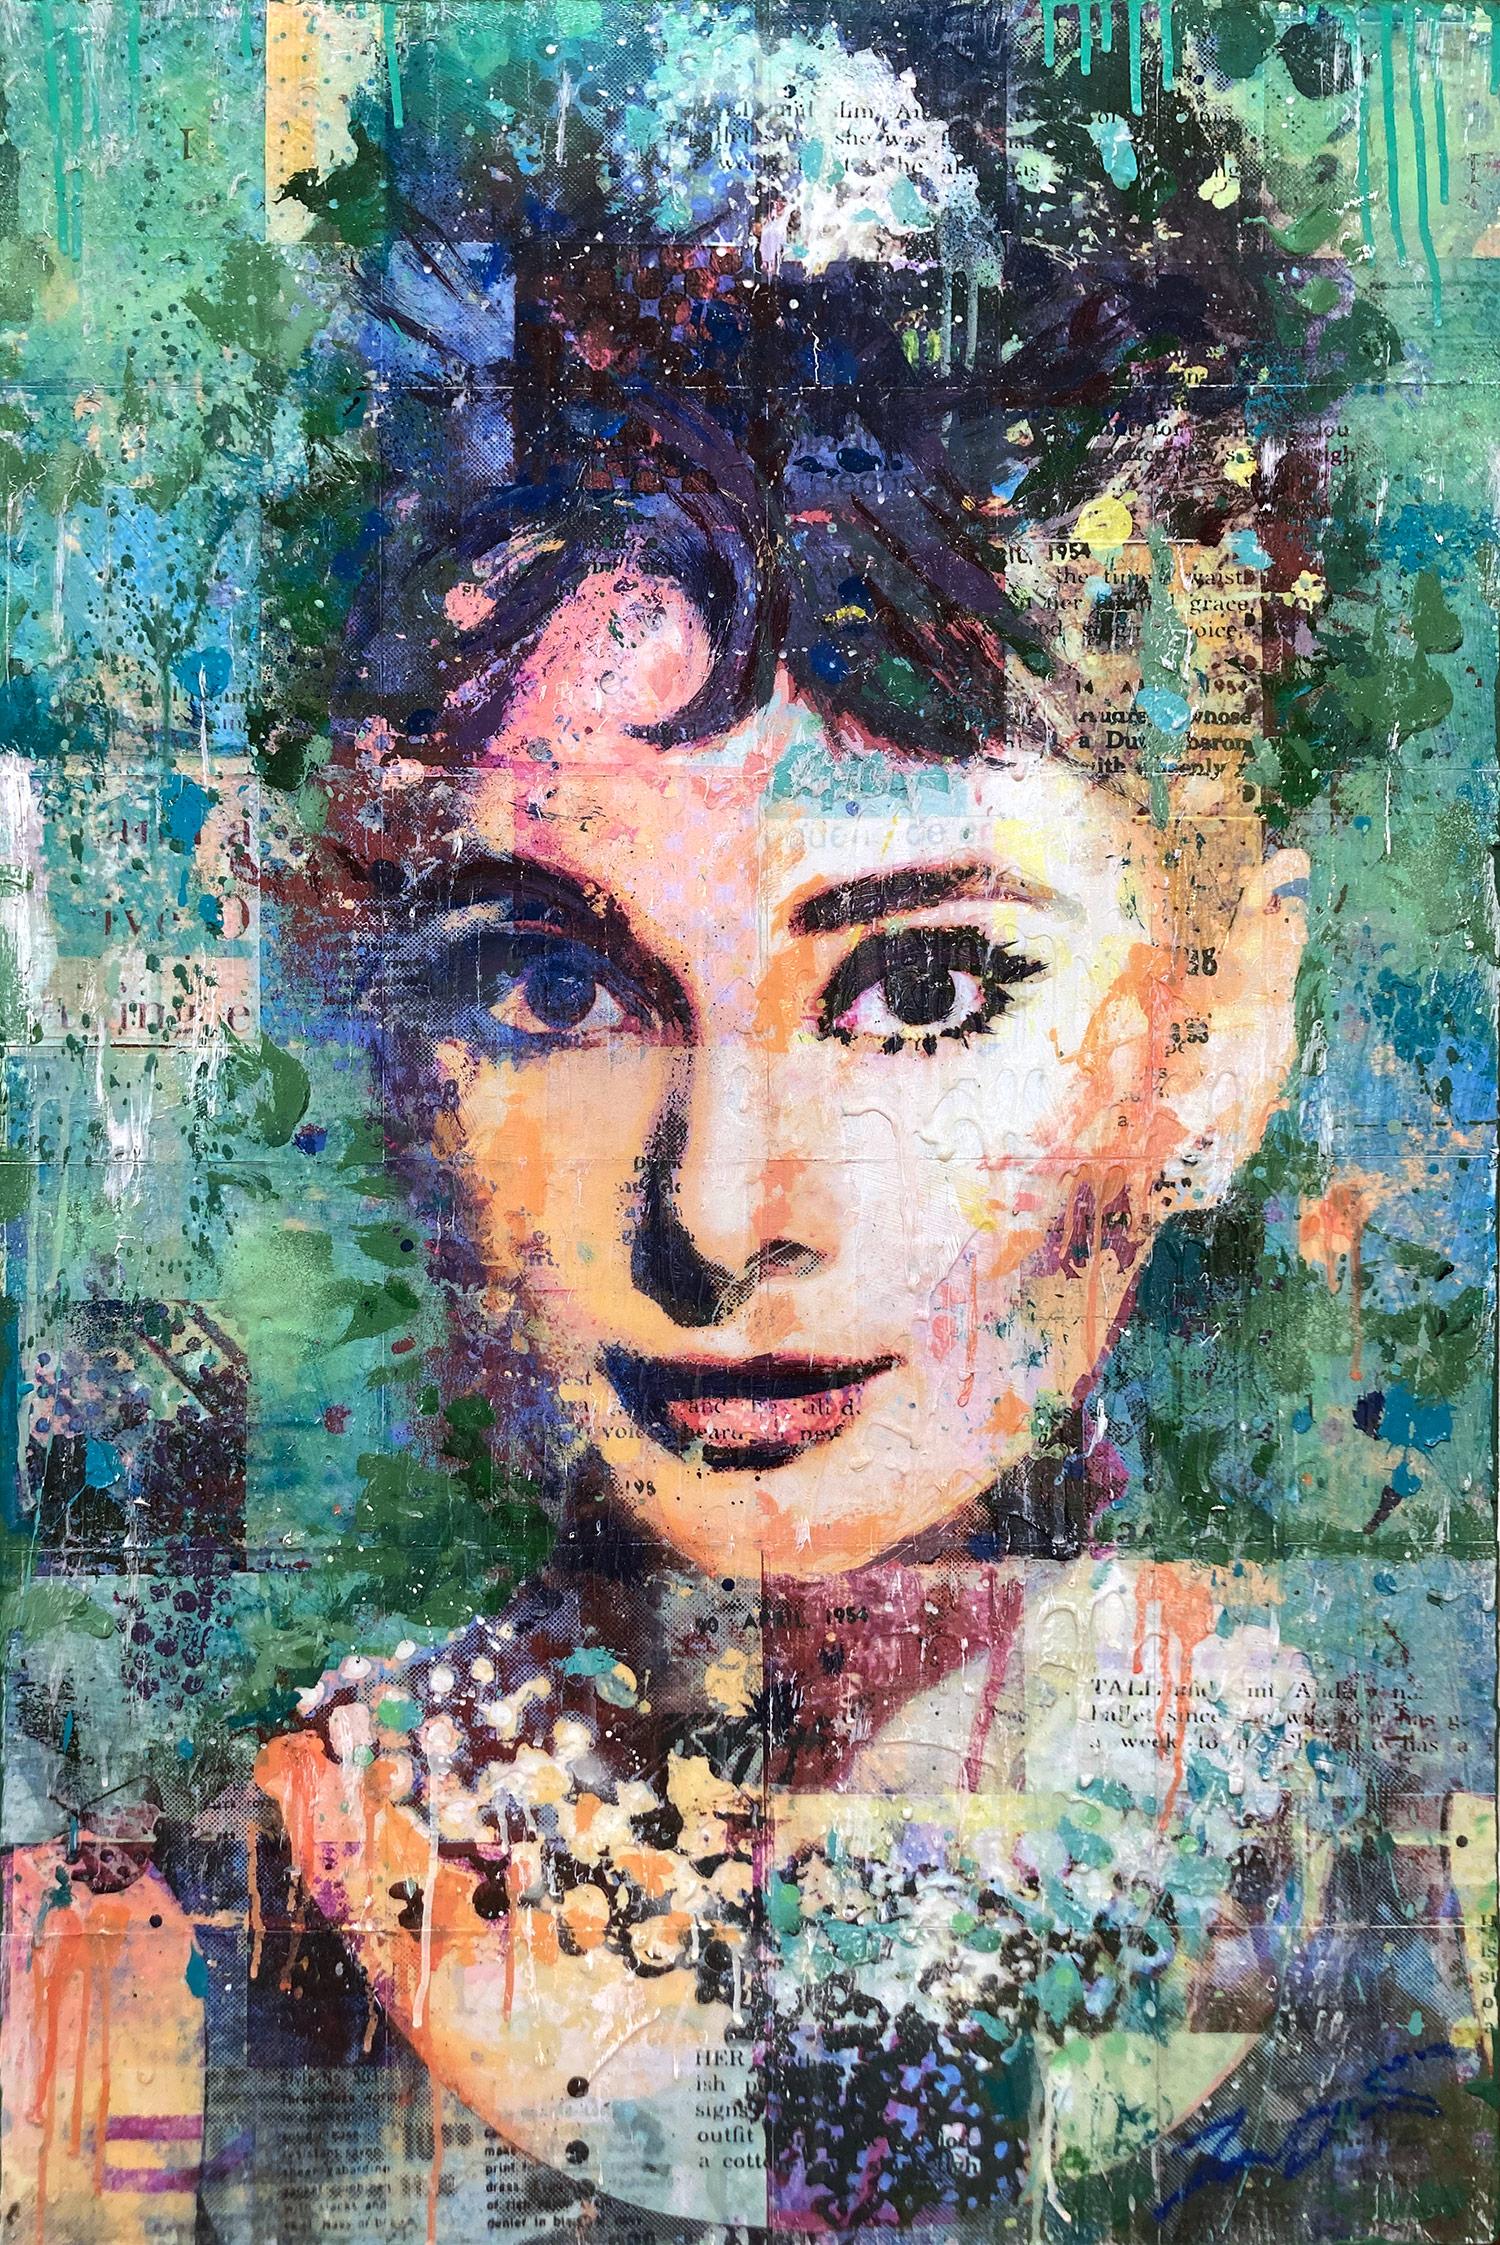 Jon Davenport Portrait Painting - "Audrey on Green" Mixed Media Figurative Collage Composition on Panel Board